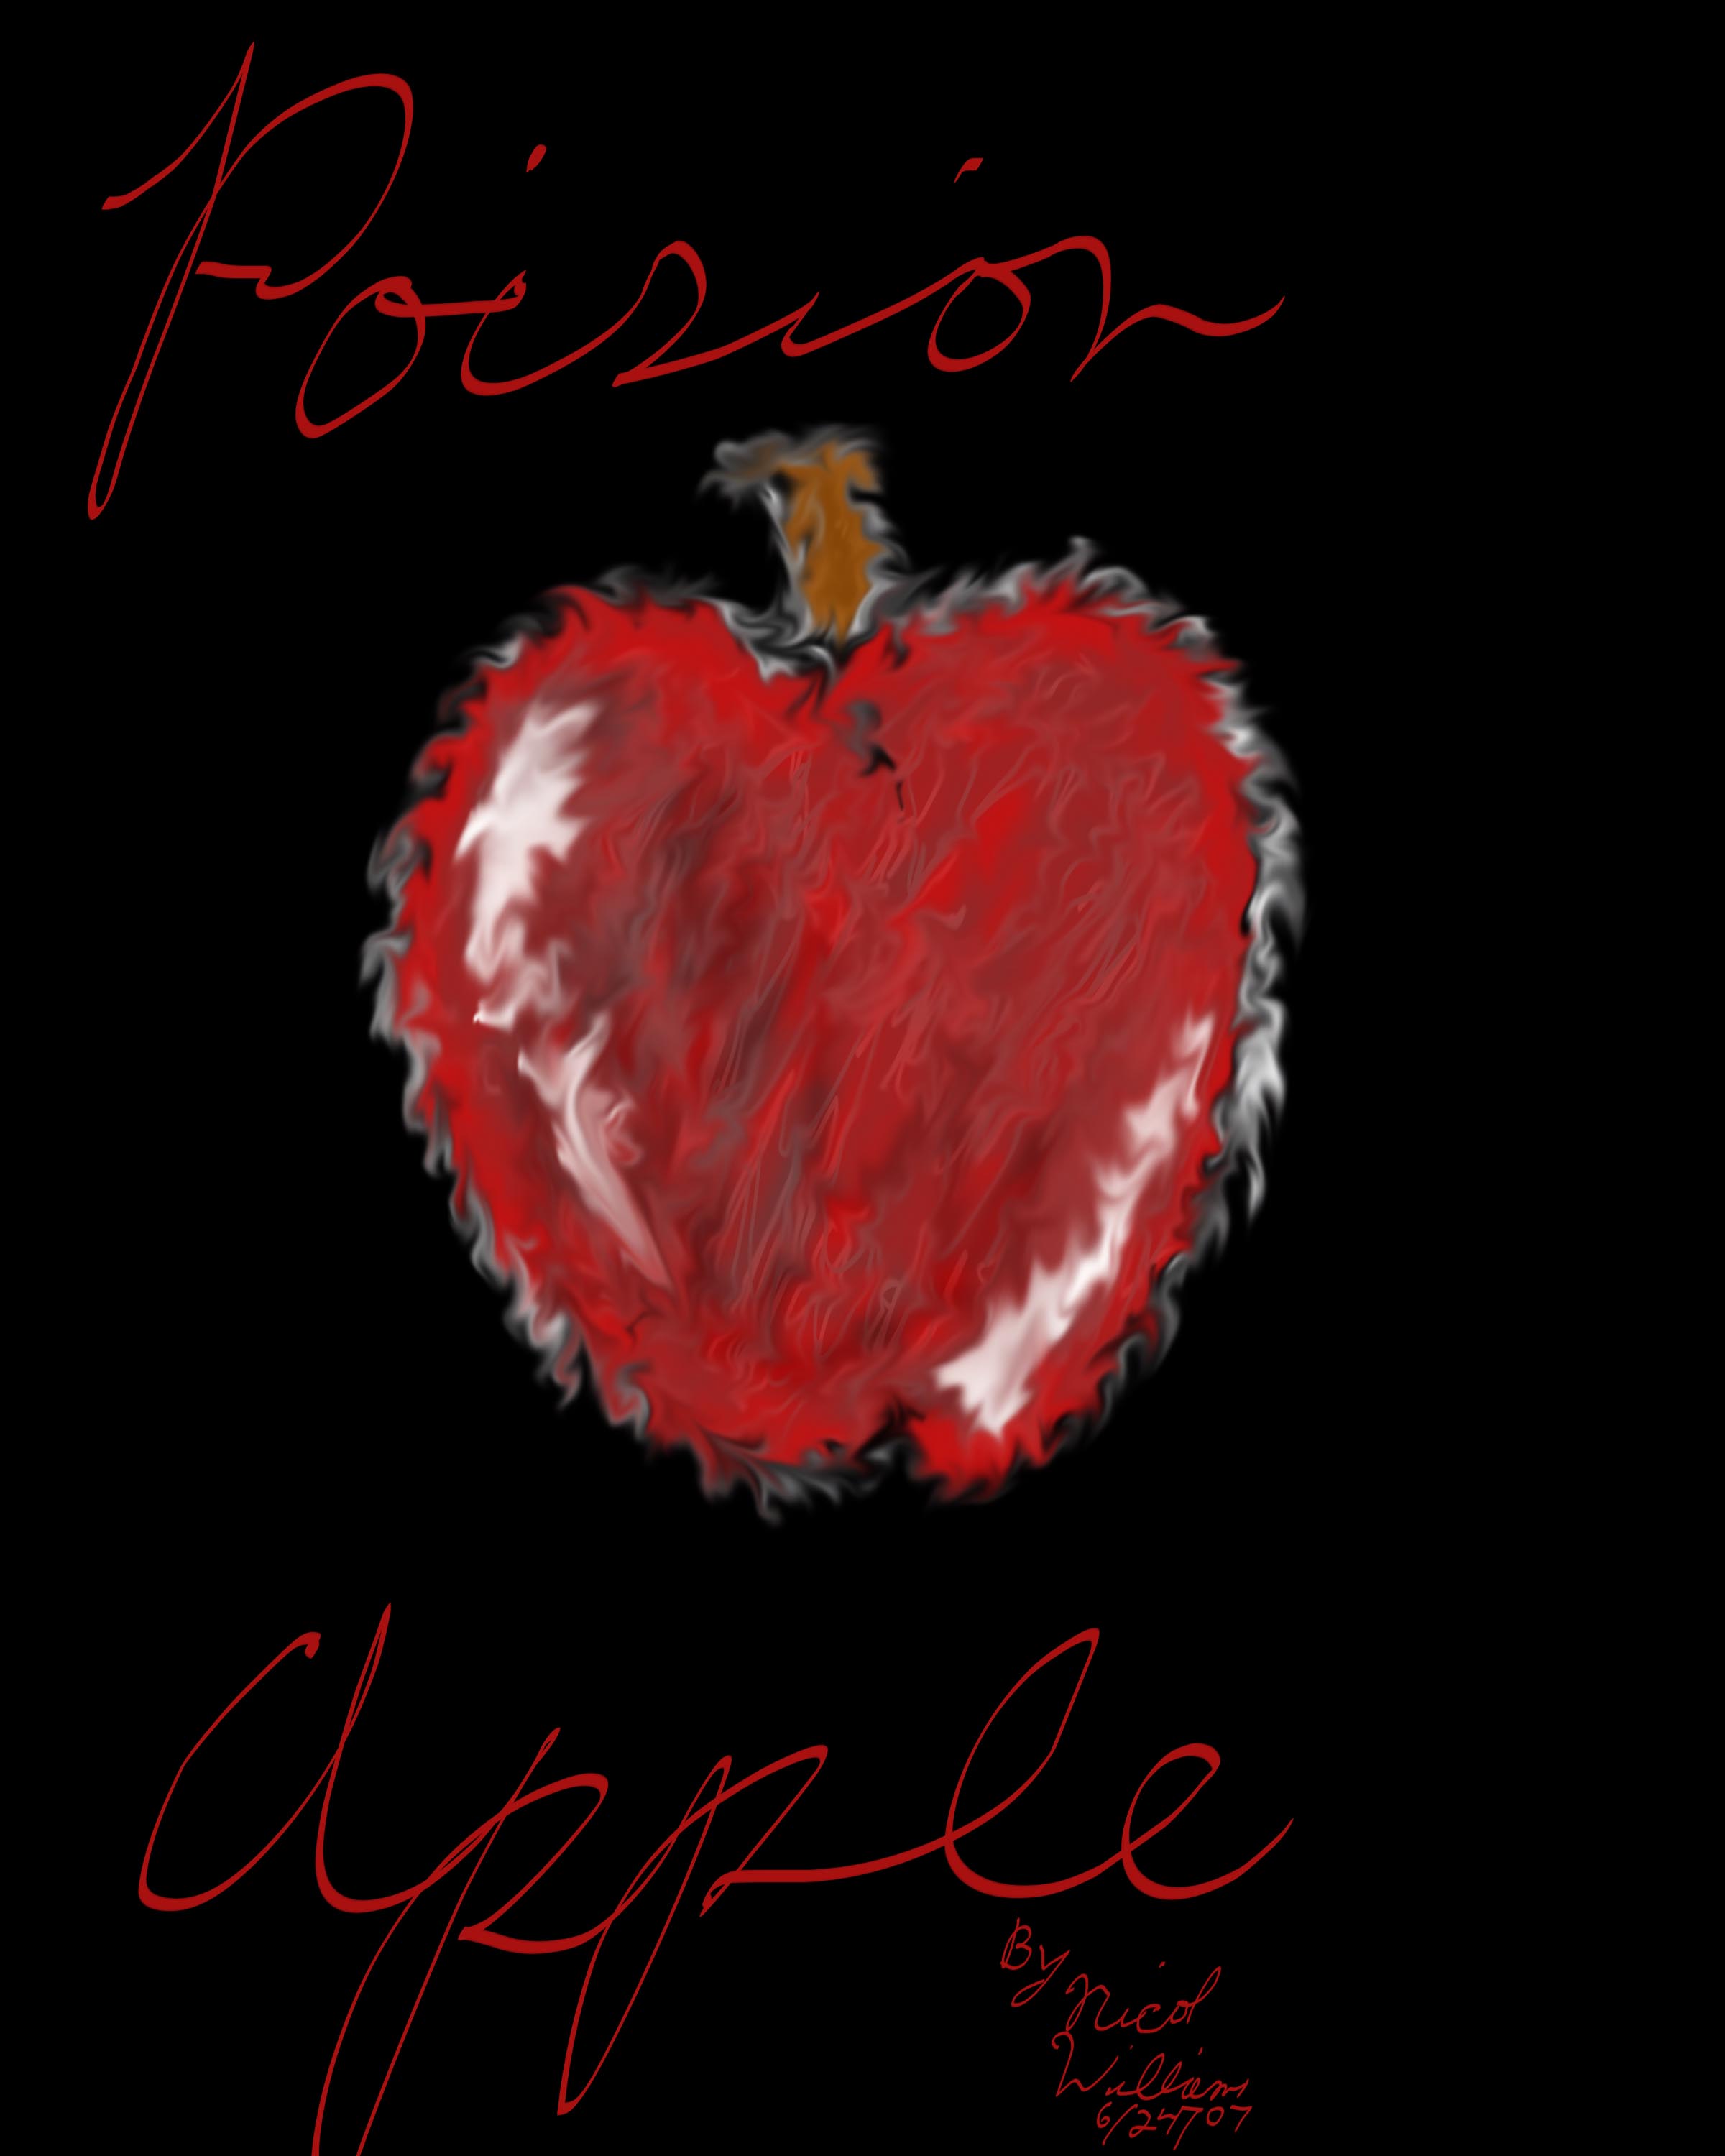 Poision Apple by silver_the_wolf